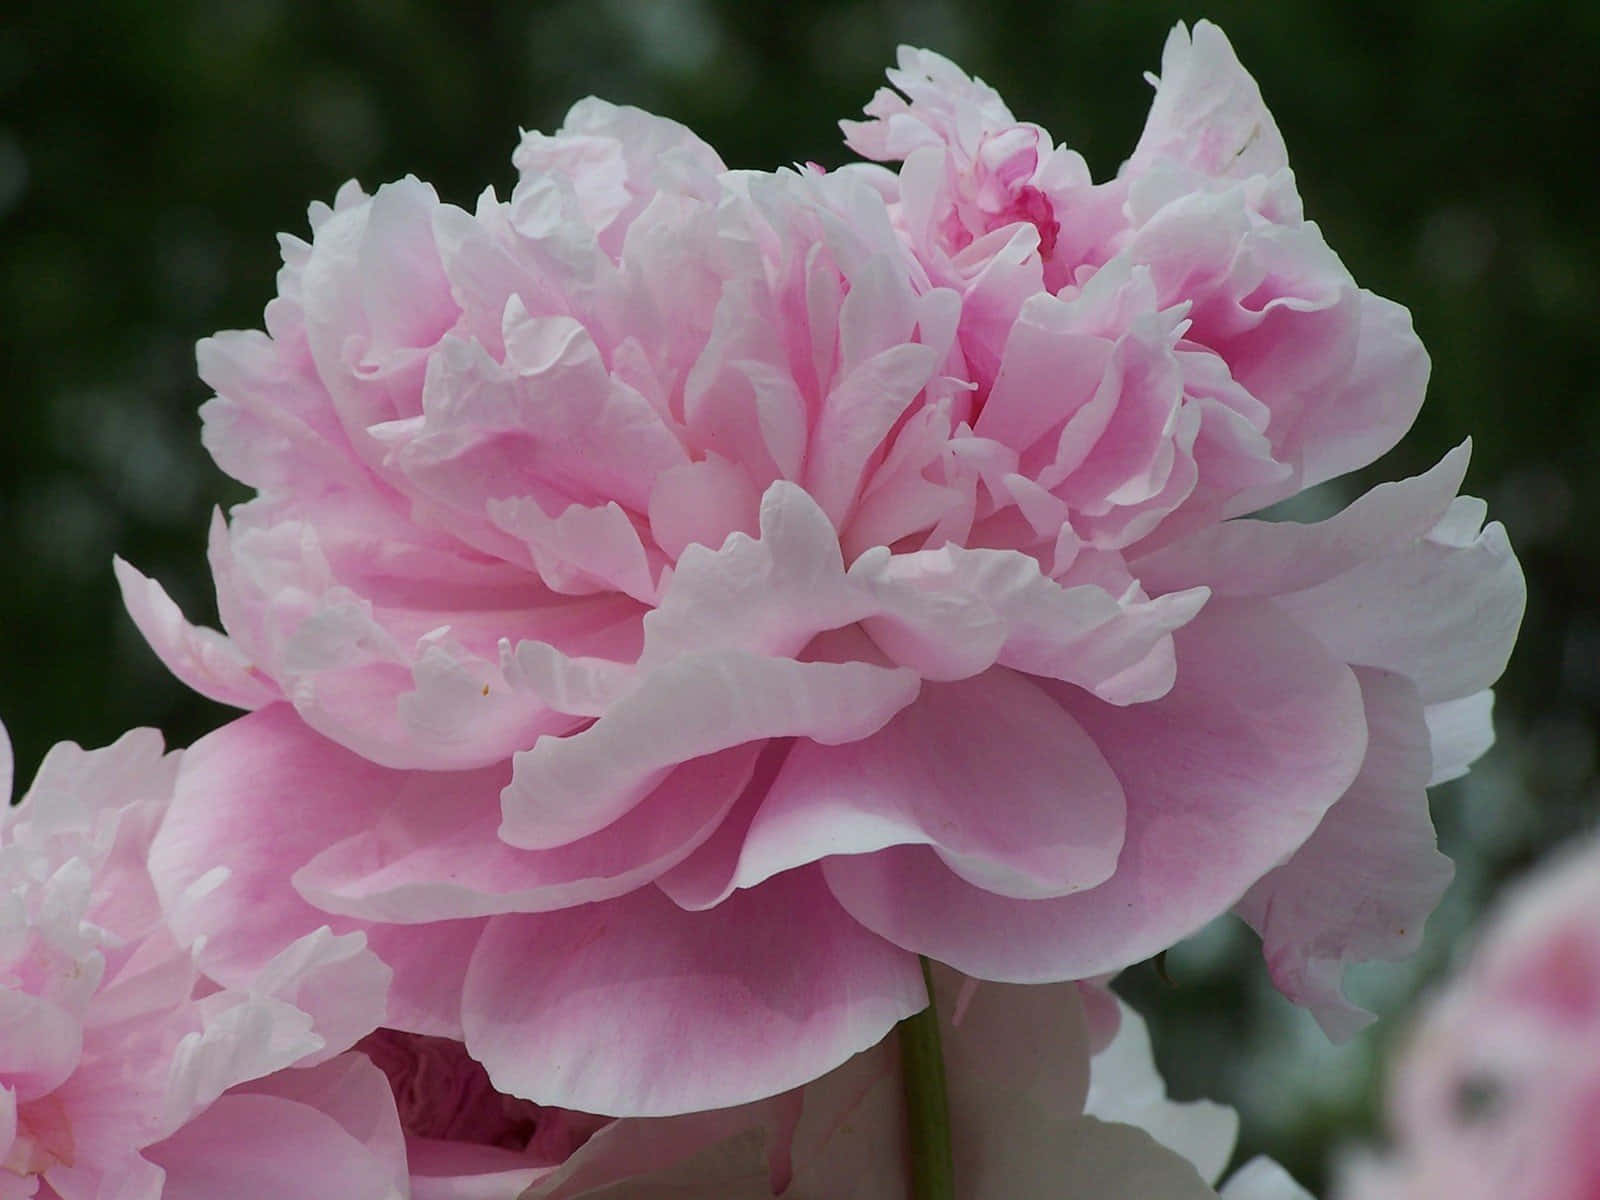 Image  A cheerful pink carnation flower